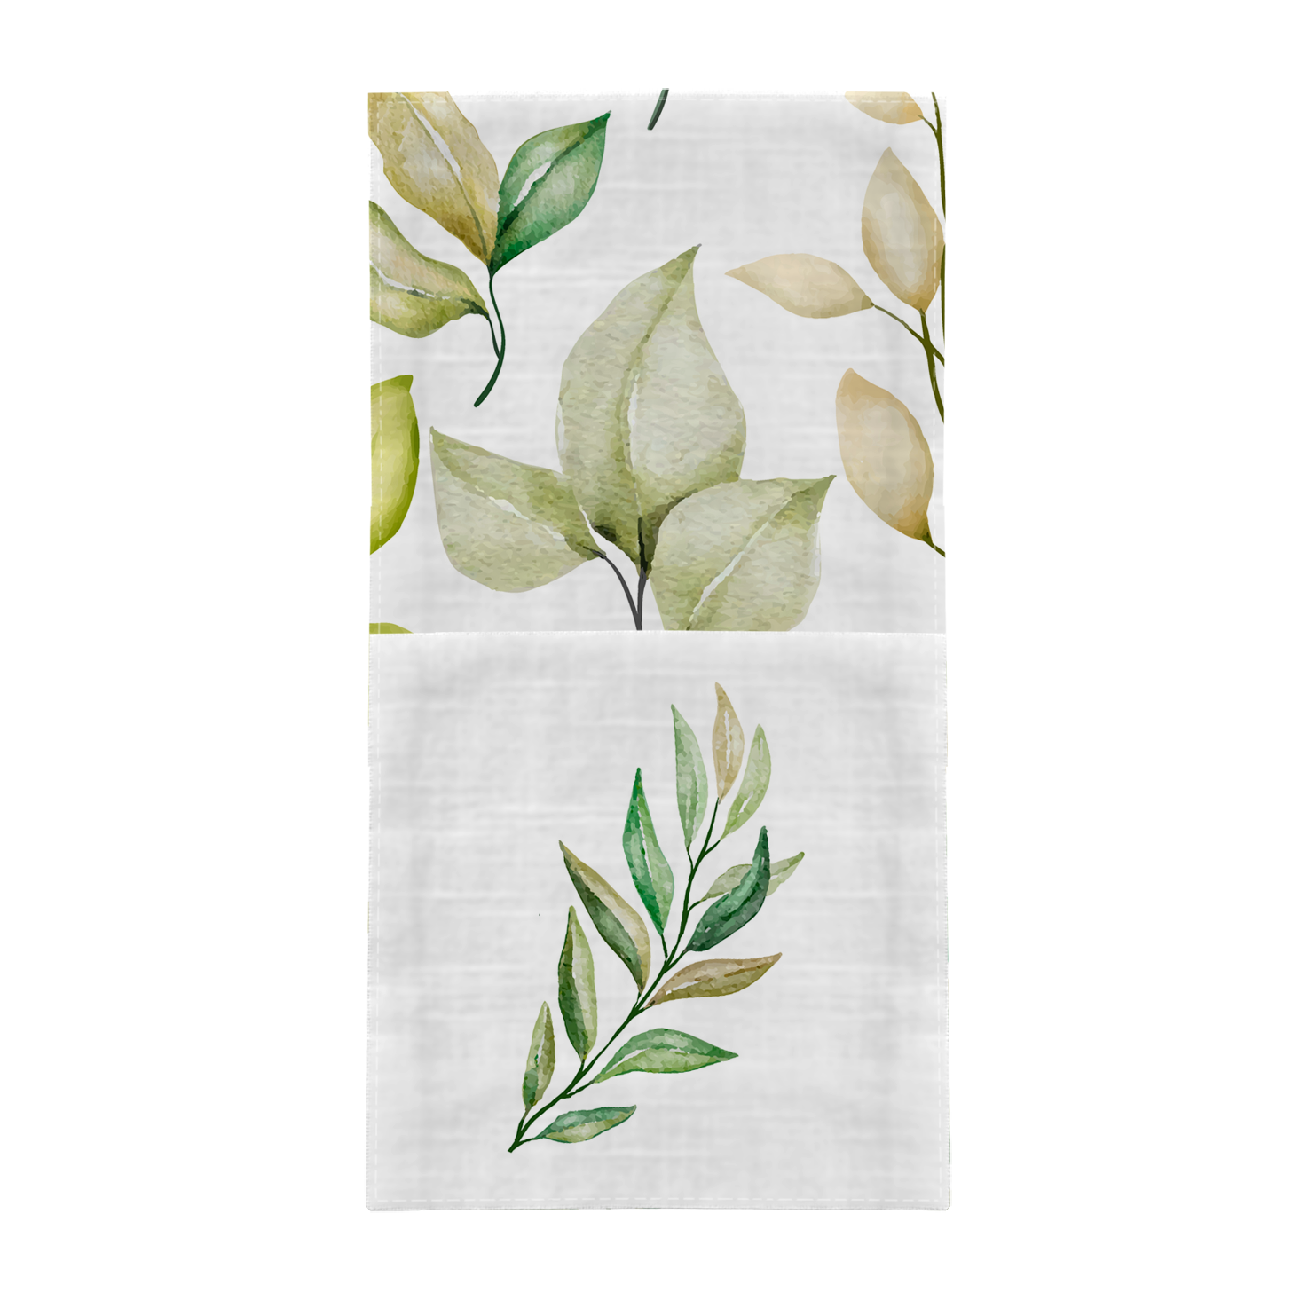 NAPKINS AND RUNNER - GREEN LEAVES - sewing set